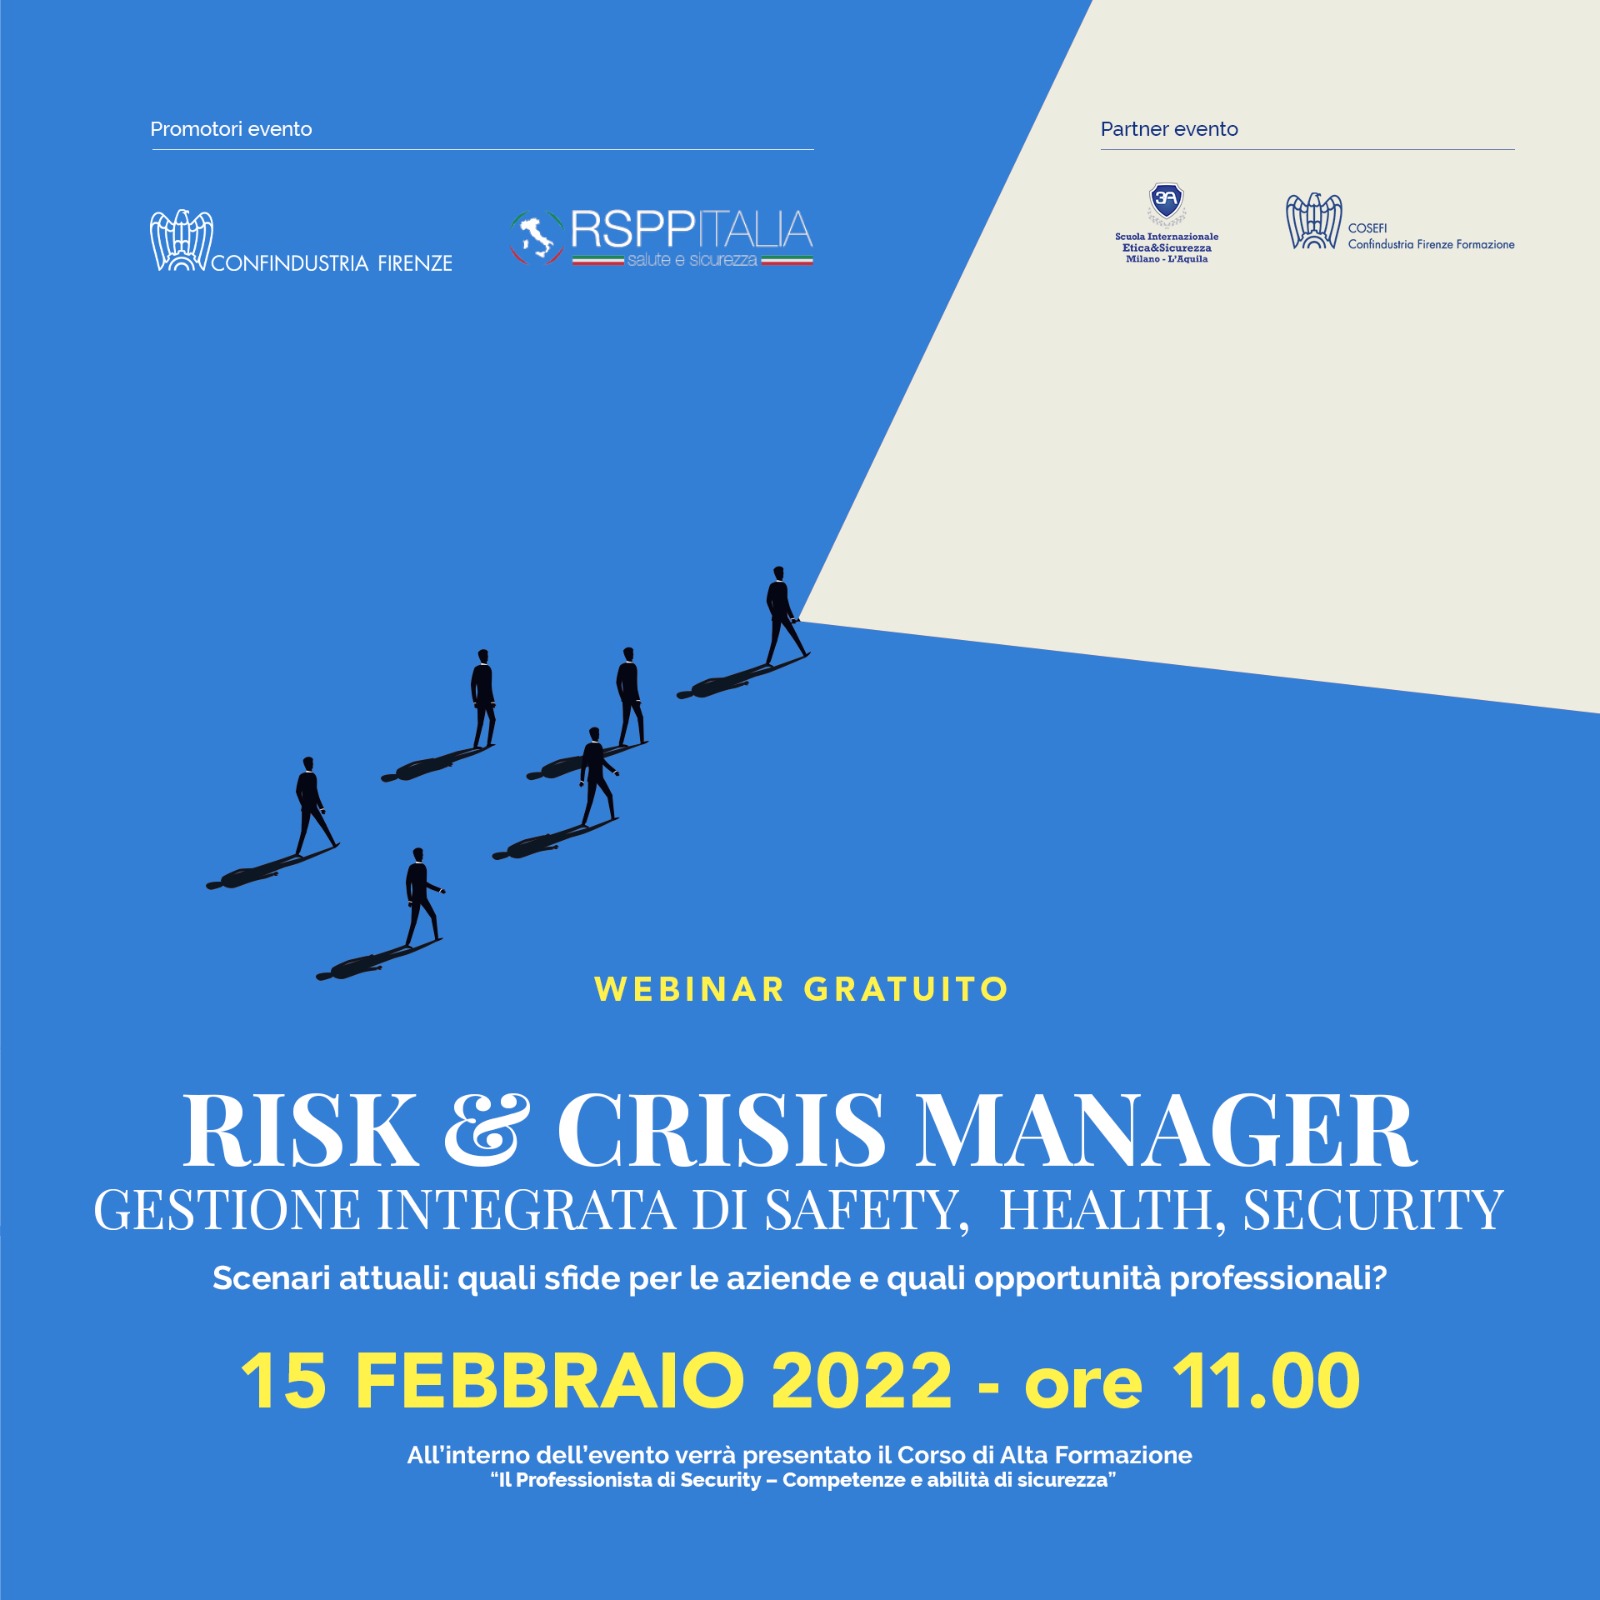 Risk & Crisis Manager: gestione integrata di Safety, Health, Security